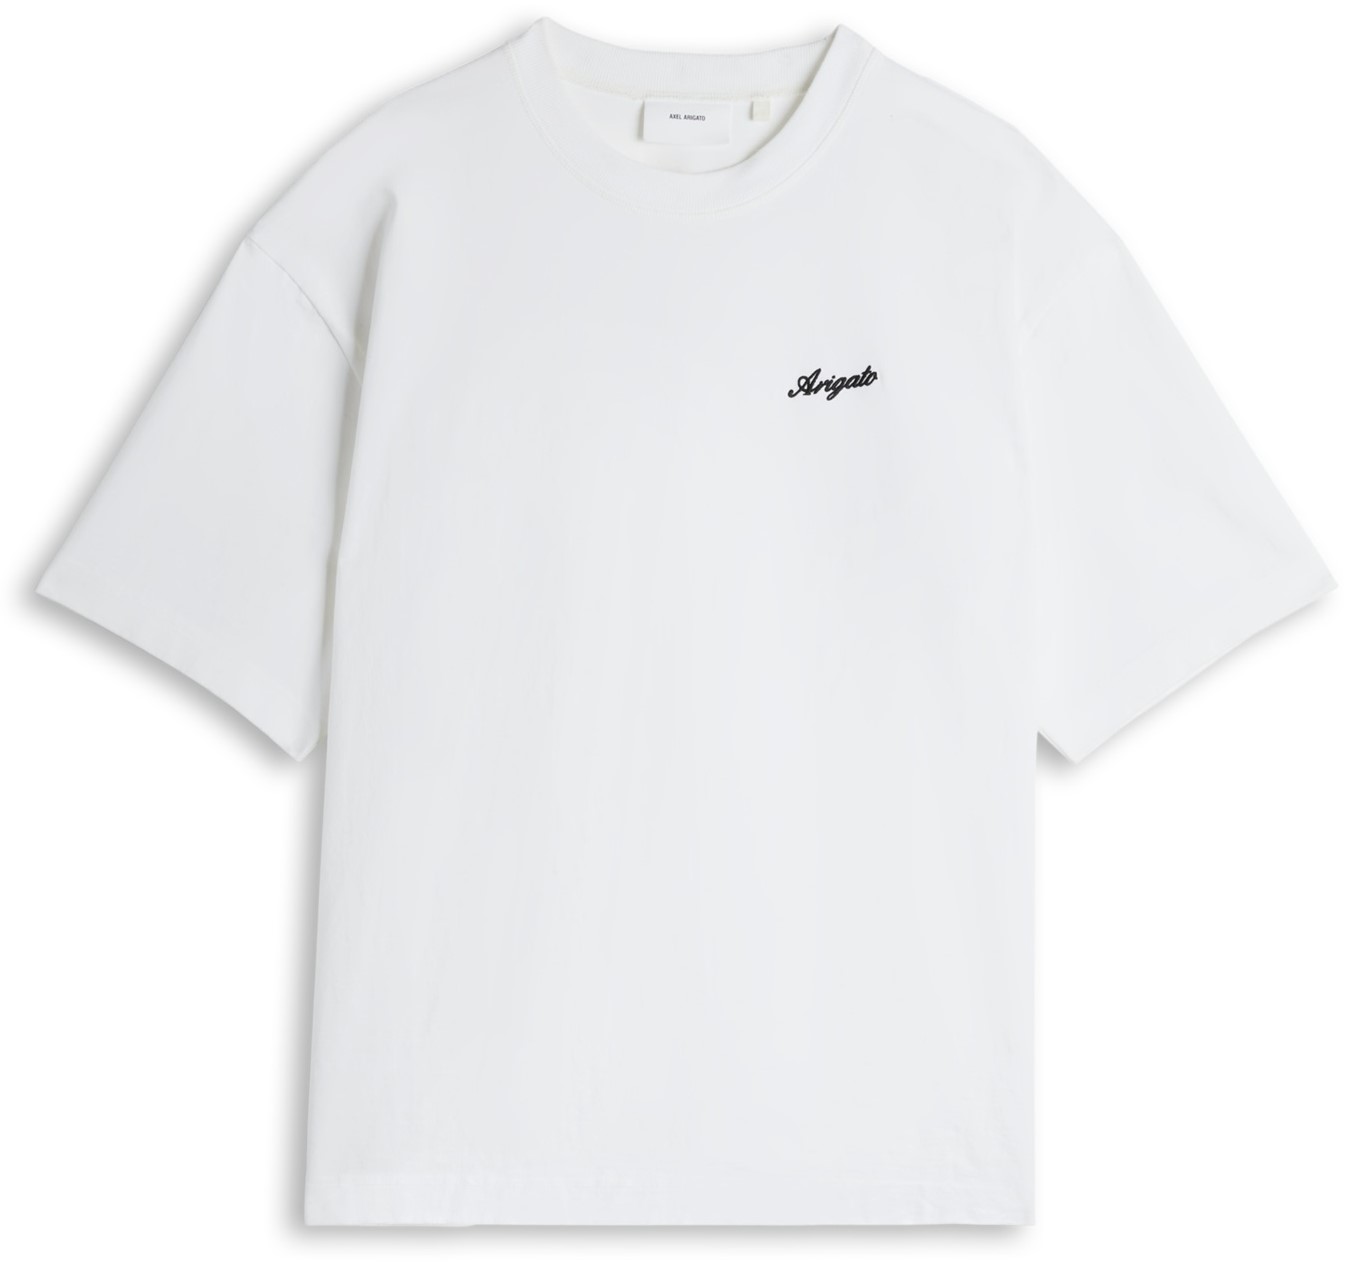 AXEL ARIGATO Honor T-Shirt in White